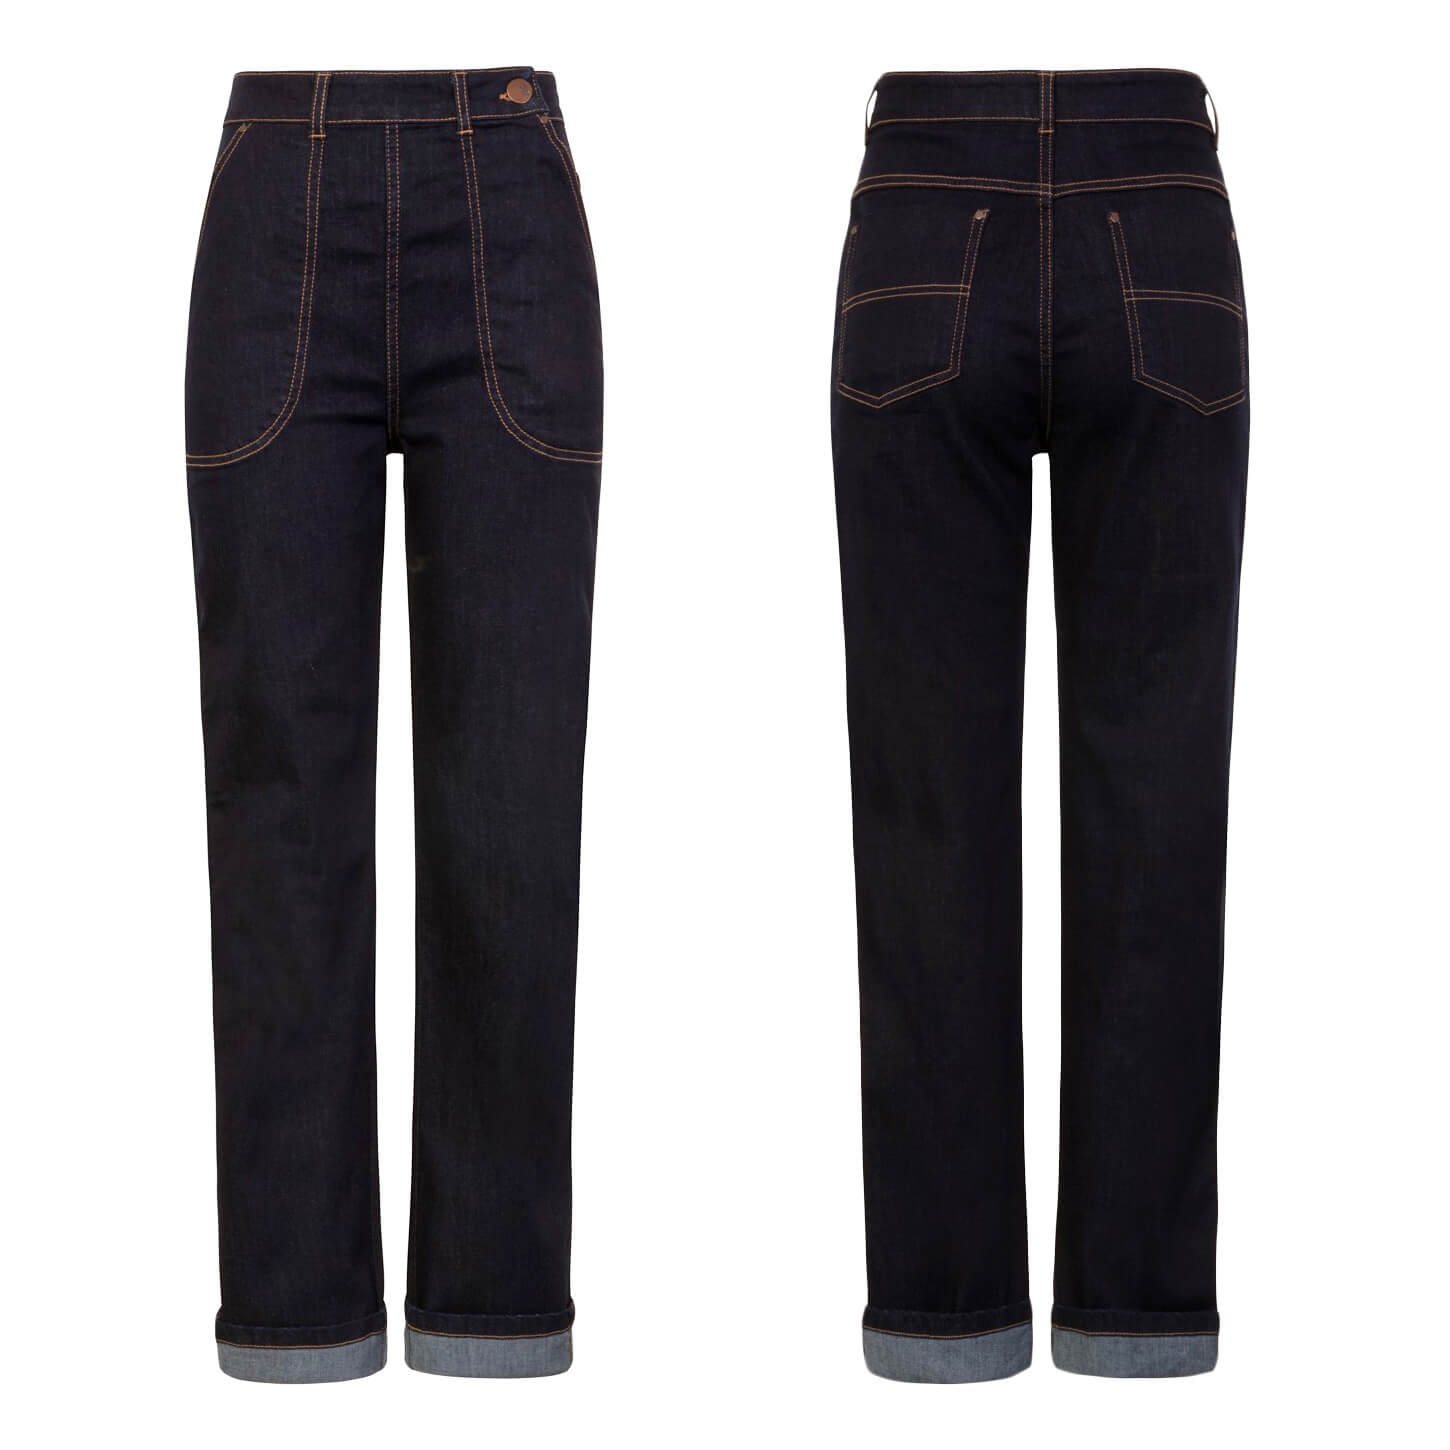 Hell Bunny Weston Denim Vintage-Style Jeans - Navy Blue on invisible mannequin